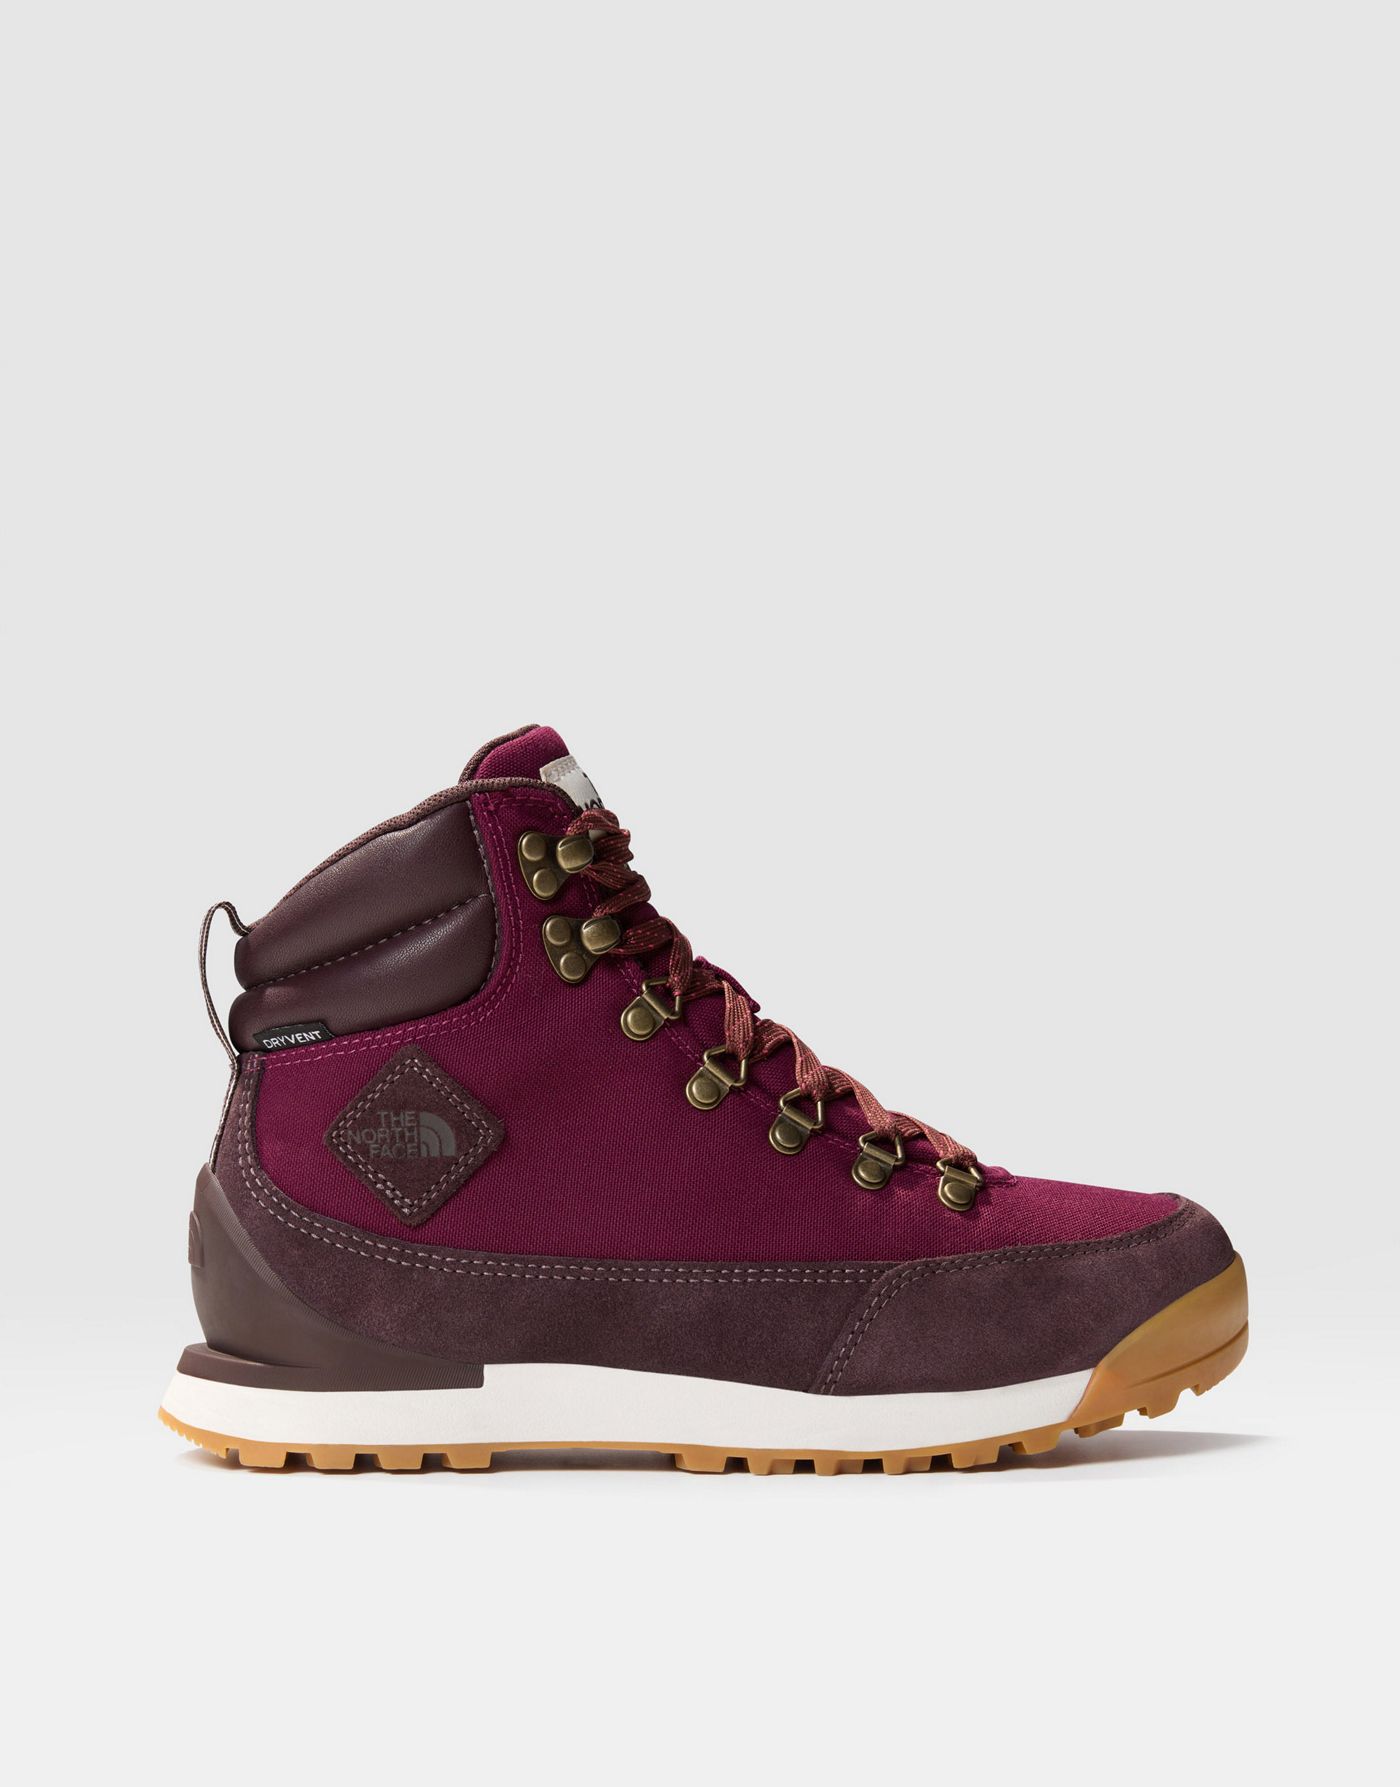 The North Face Back-to-berkeley iv textile lifestyle boots in coal brown